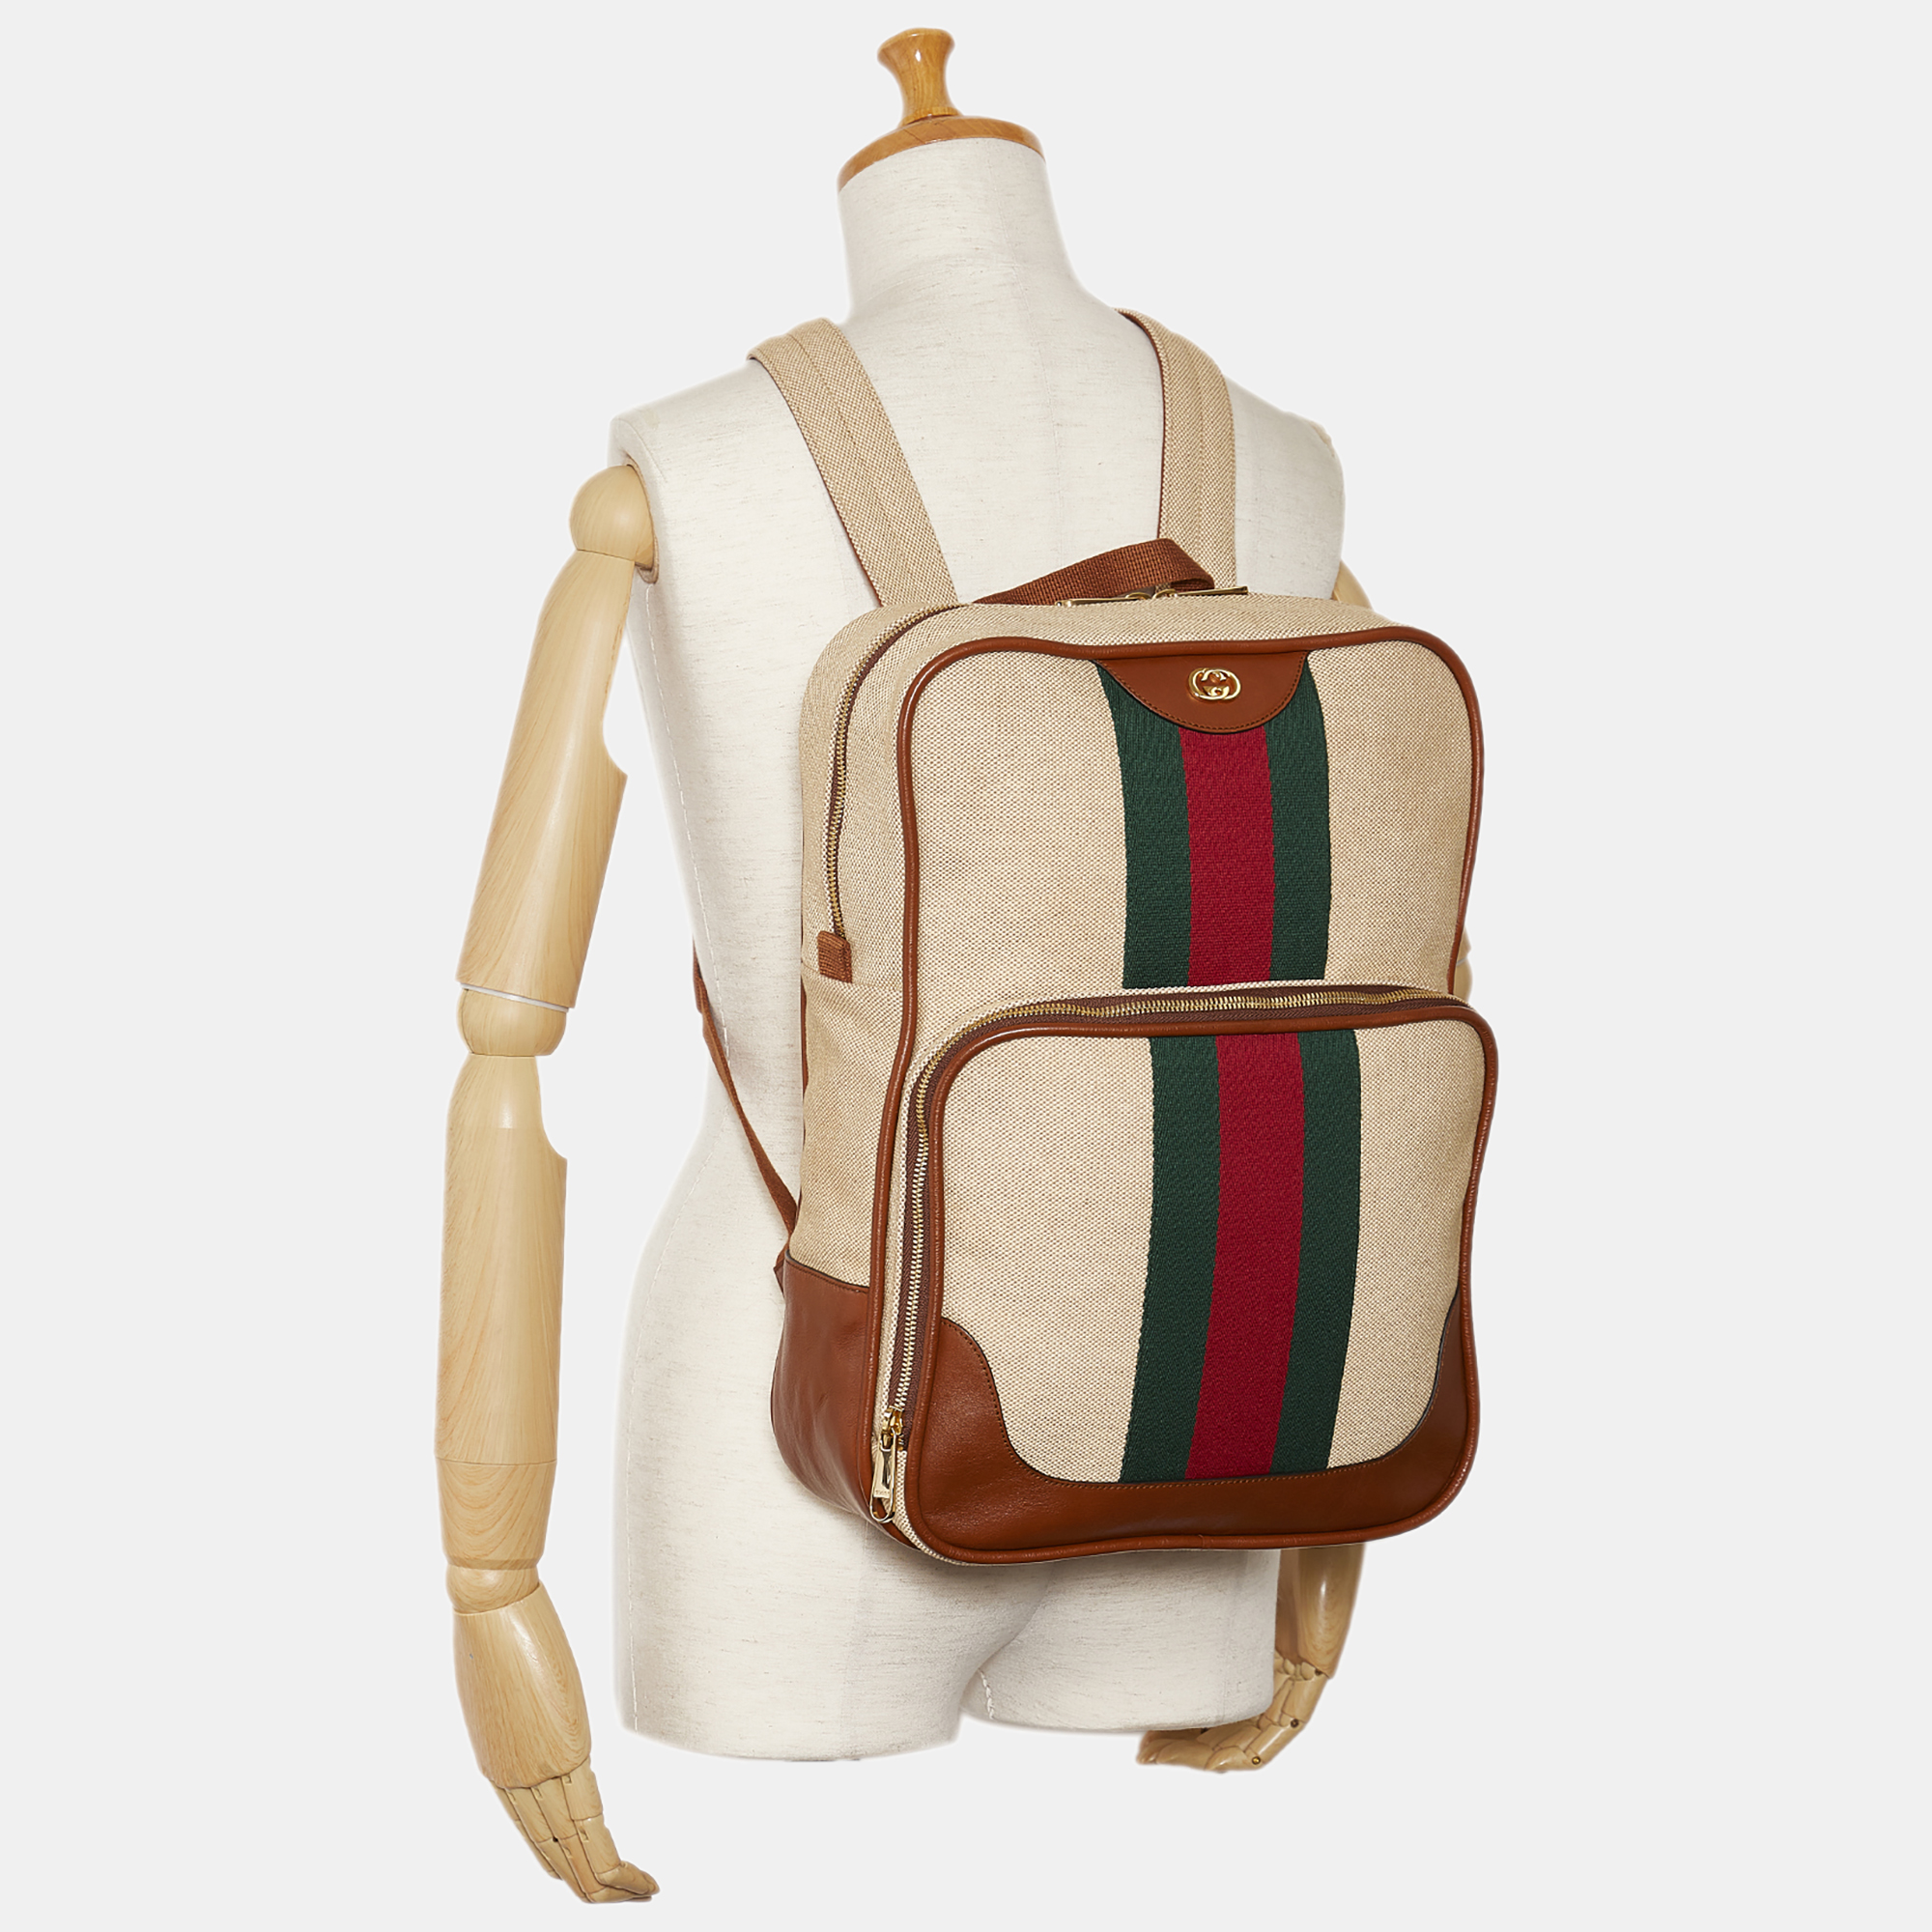 Gucci Beige Web Canvas Backpack